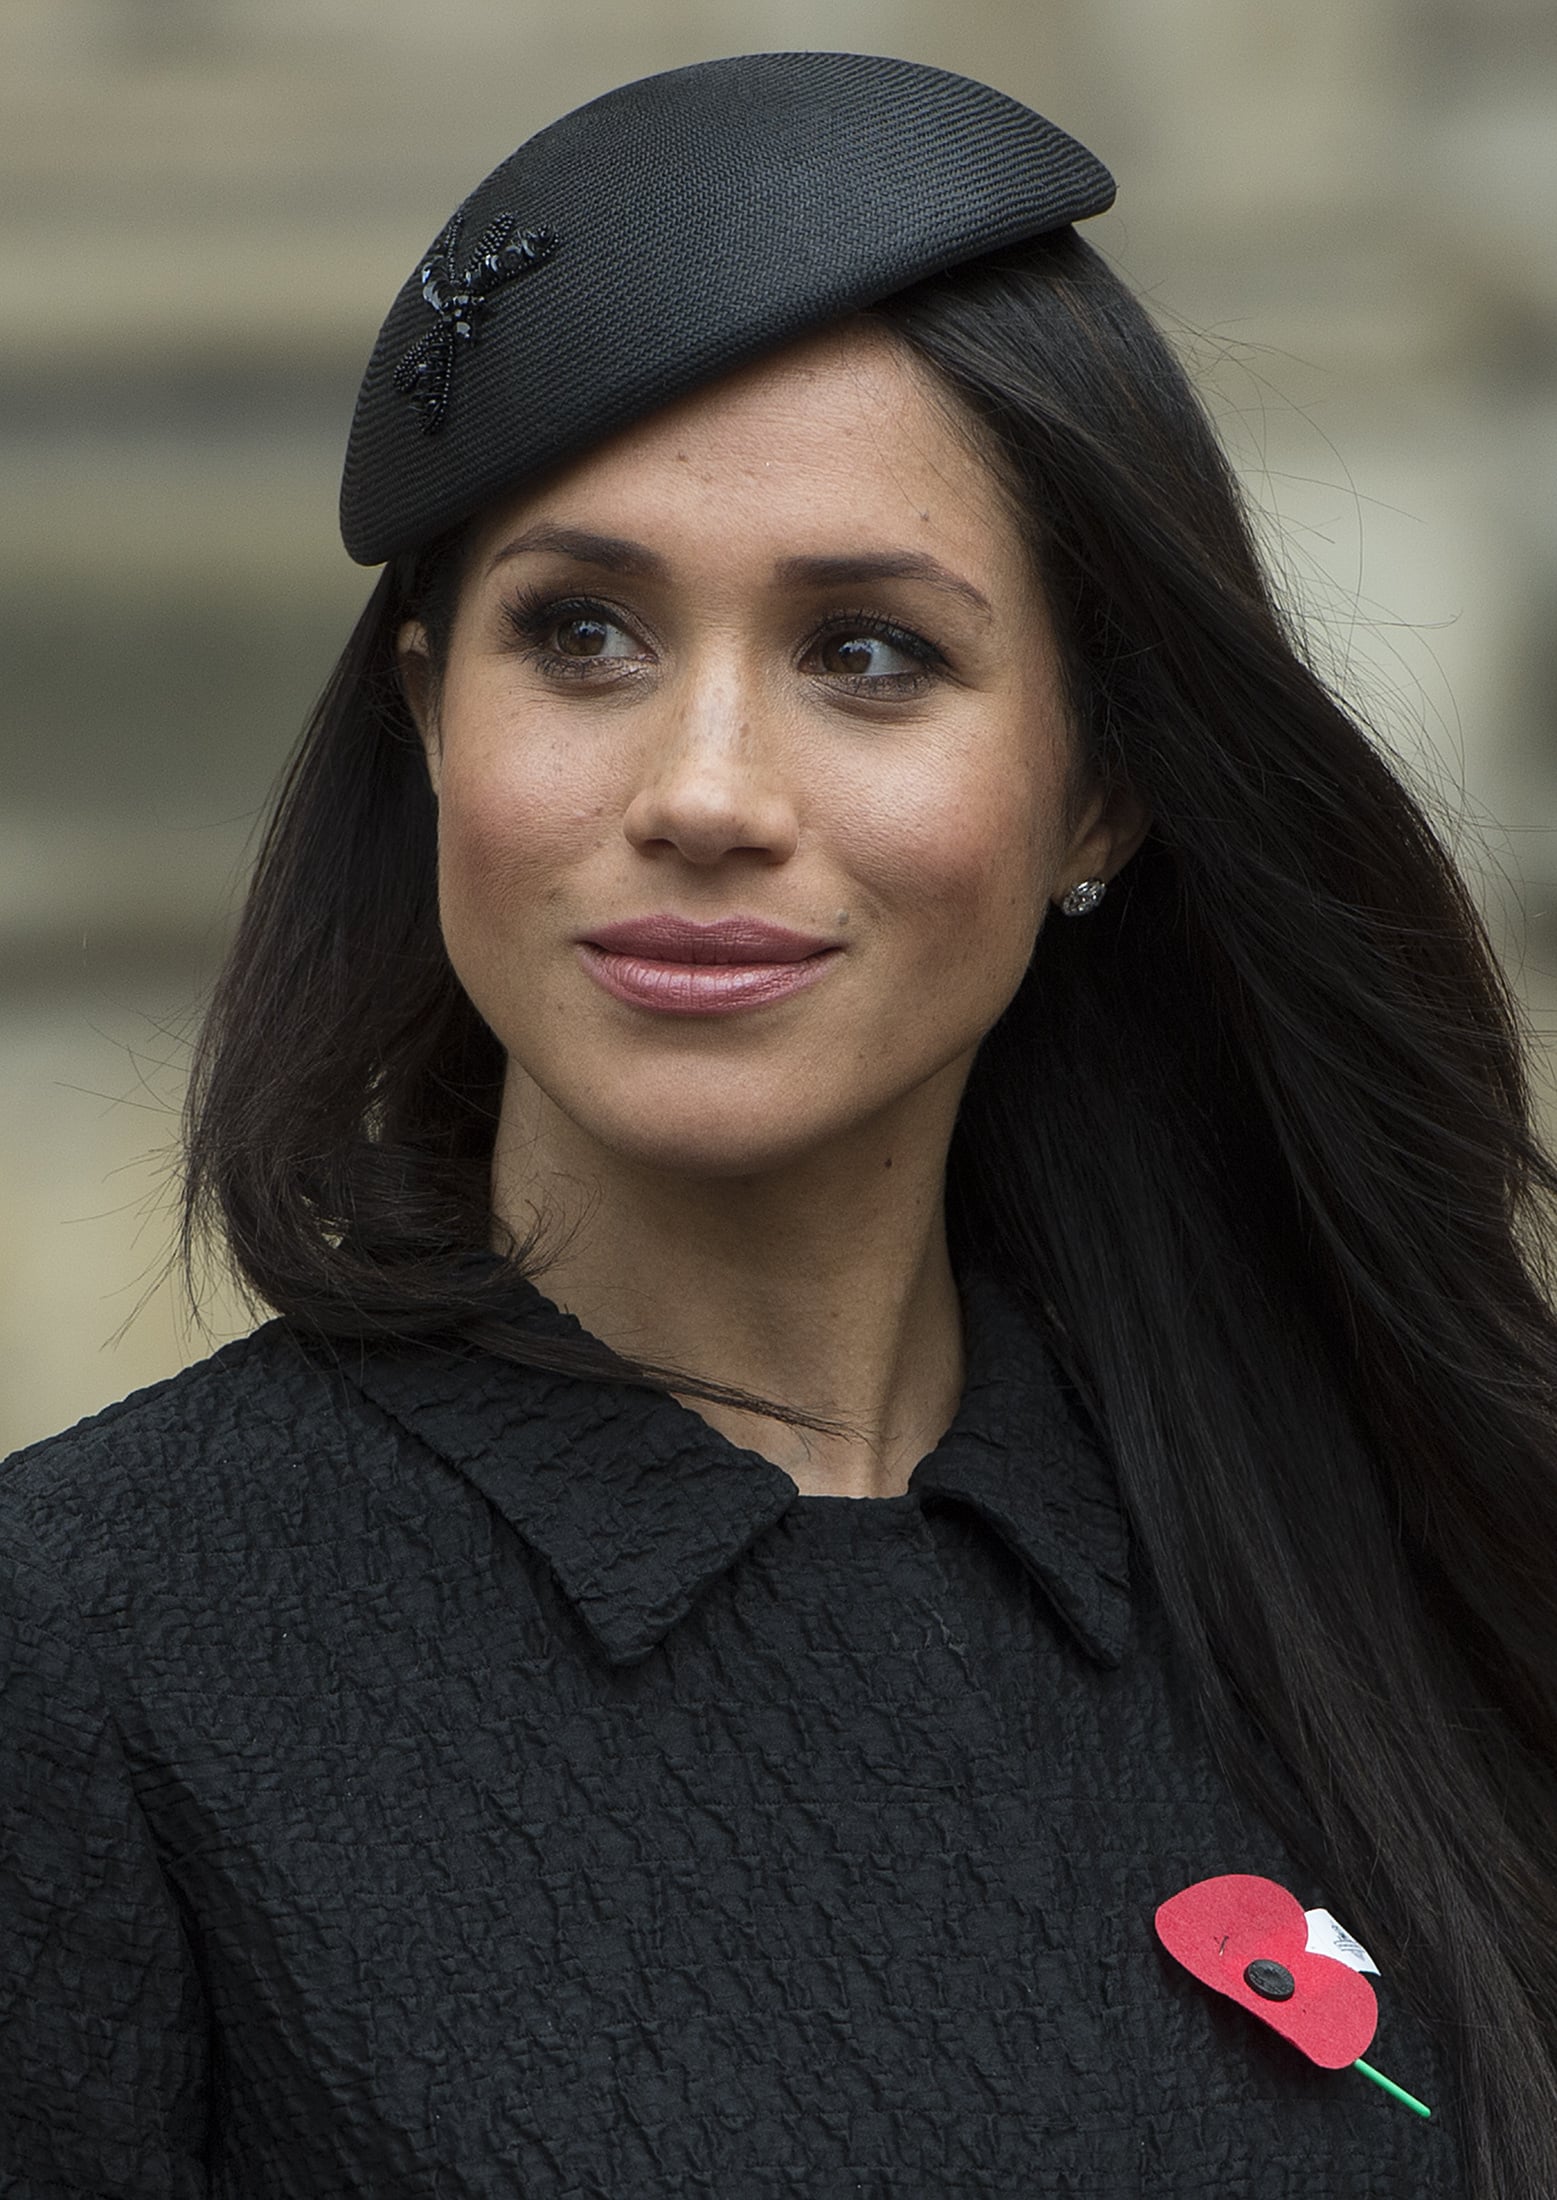 LONDON, ENGLAND - APRIL 25:  Meghan Markle attend an Anzac Day service at Westminster Abbey on April 25, 2018 in London, England. (Photo by Eddie Mulholland - WPA Pool/Getty Images)